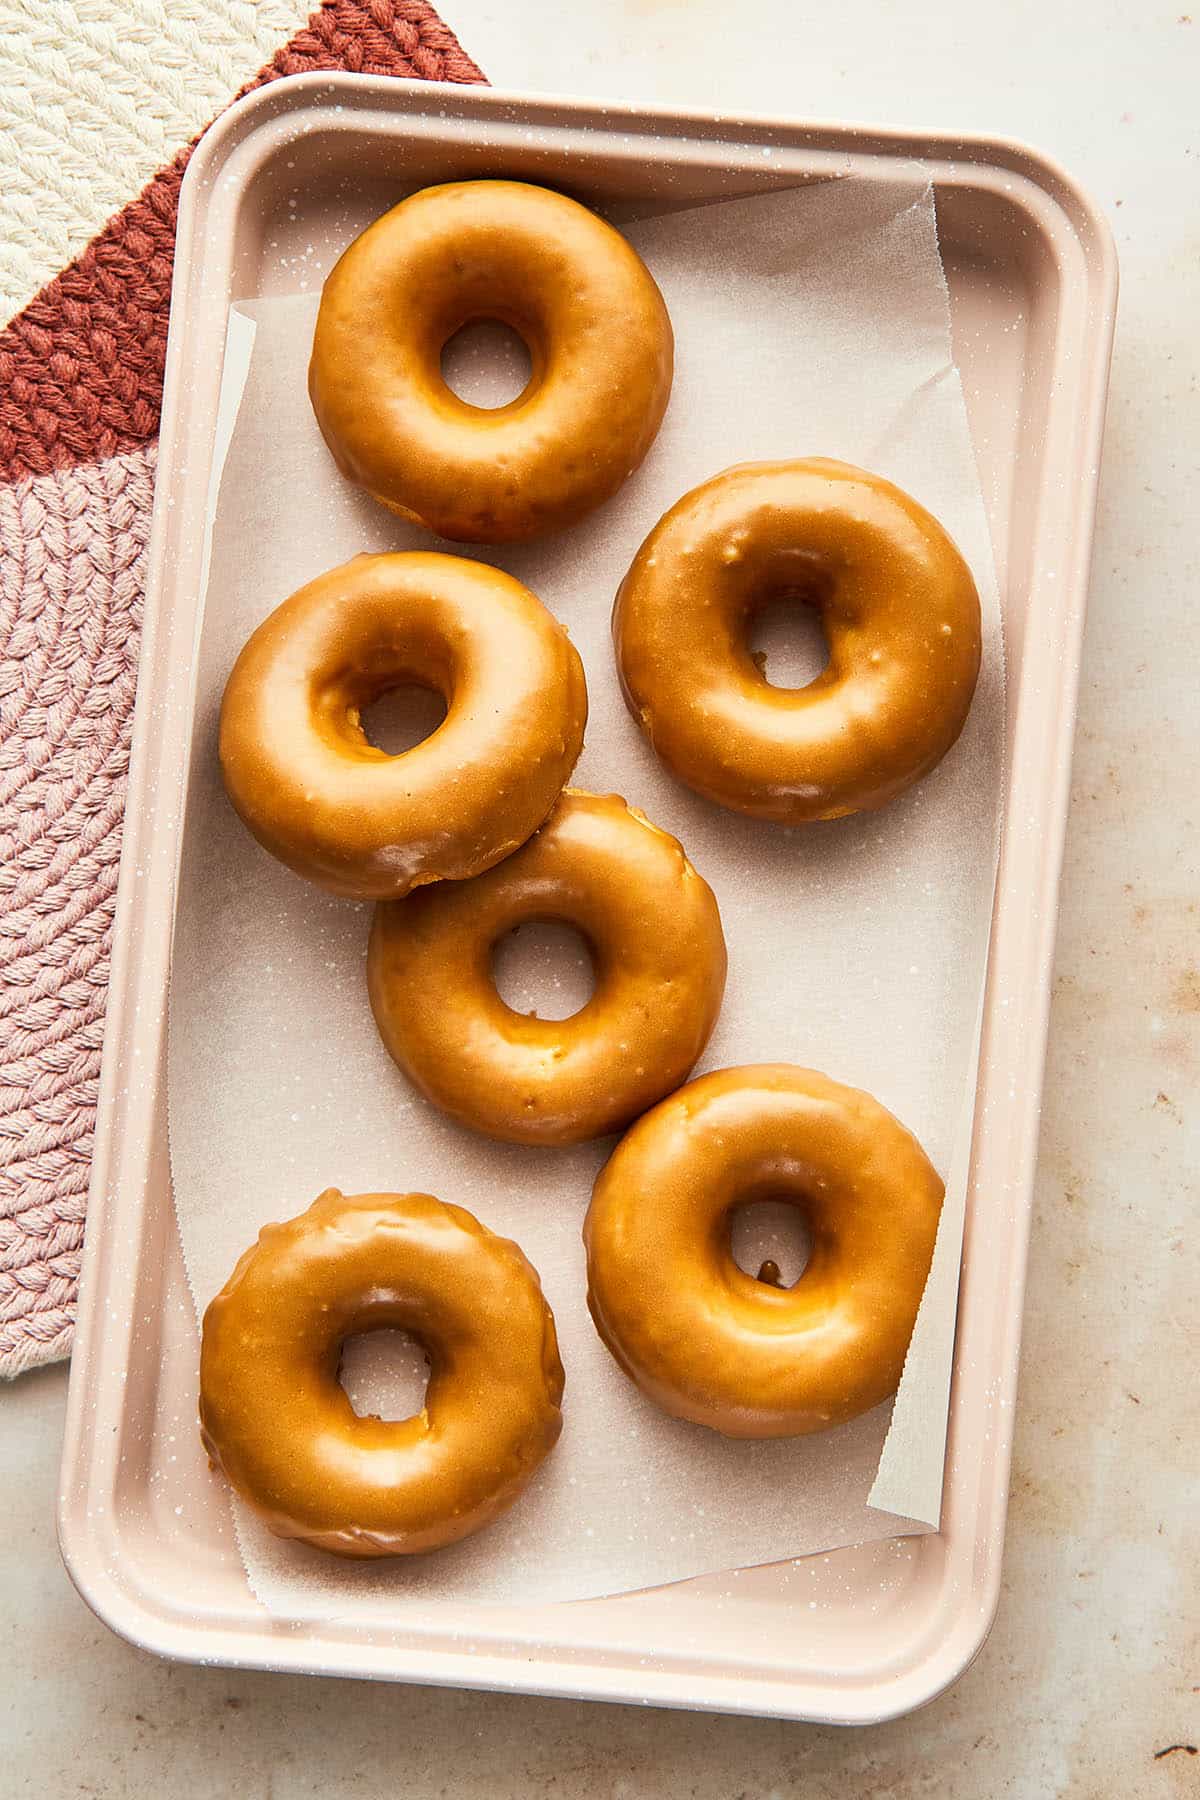 A tray filled with glazed donuts.